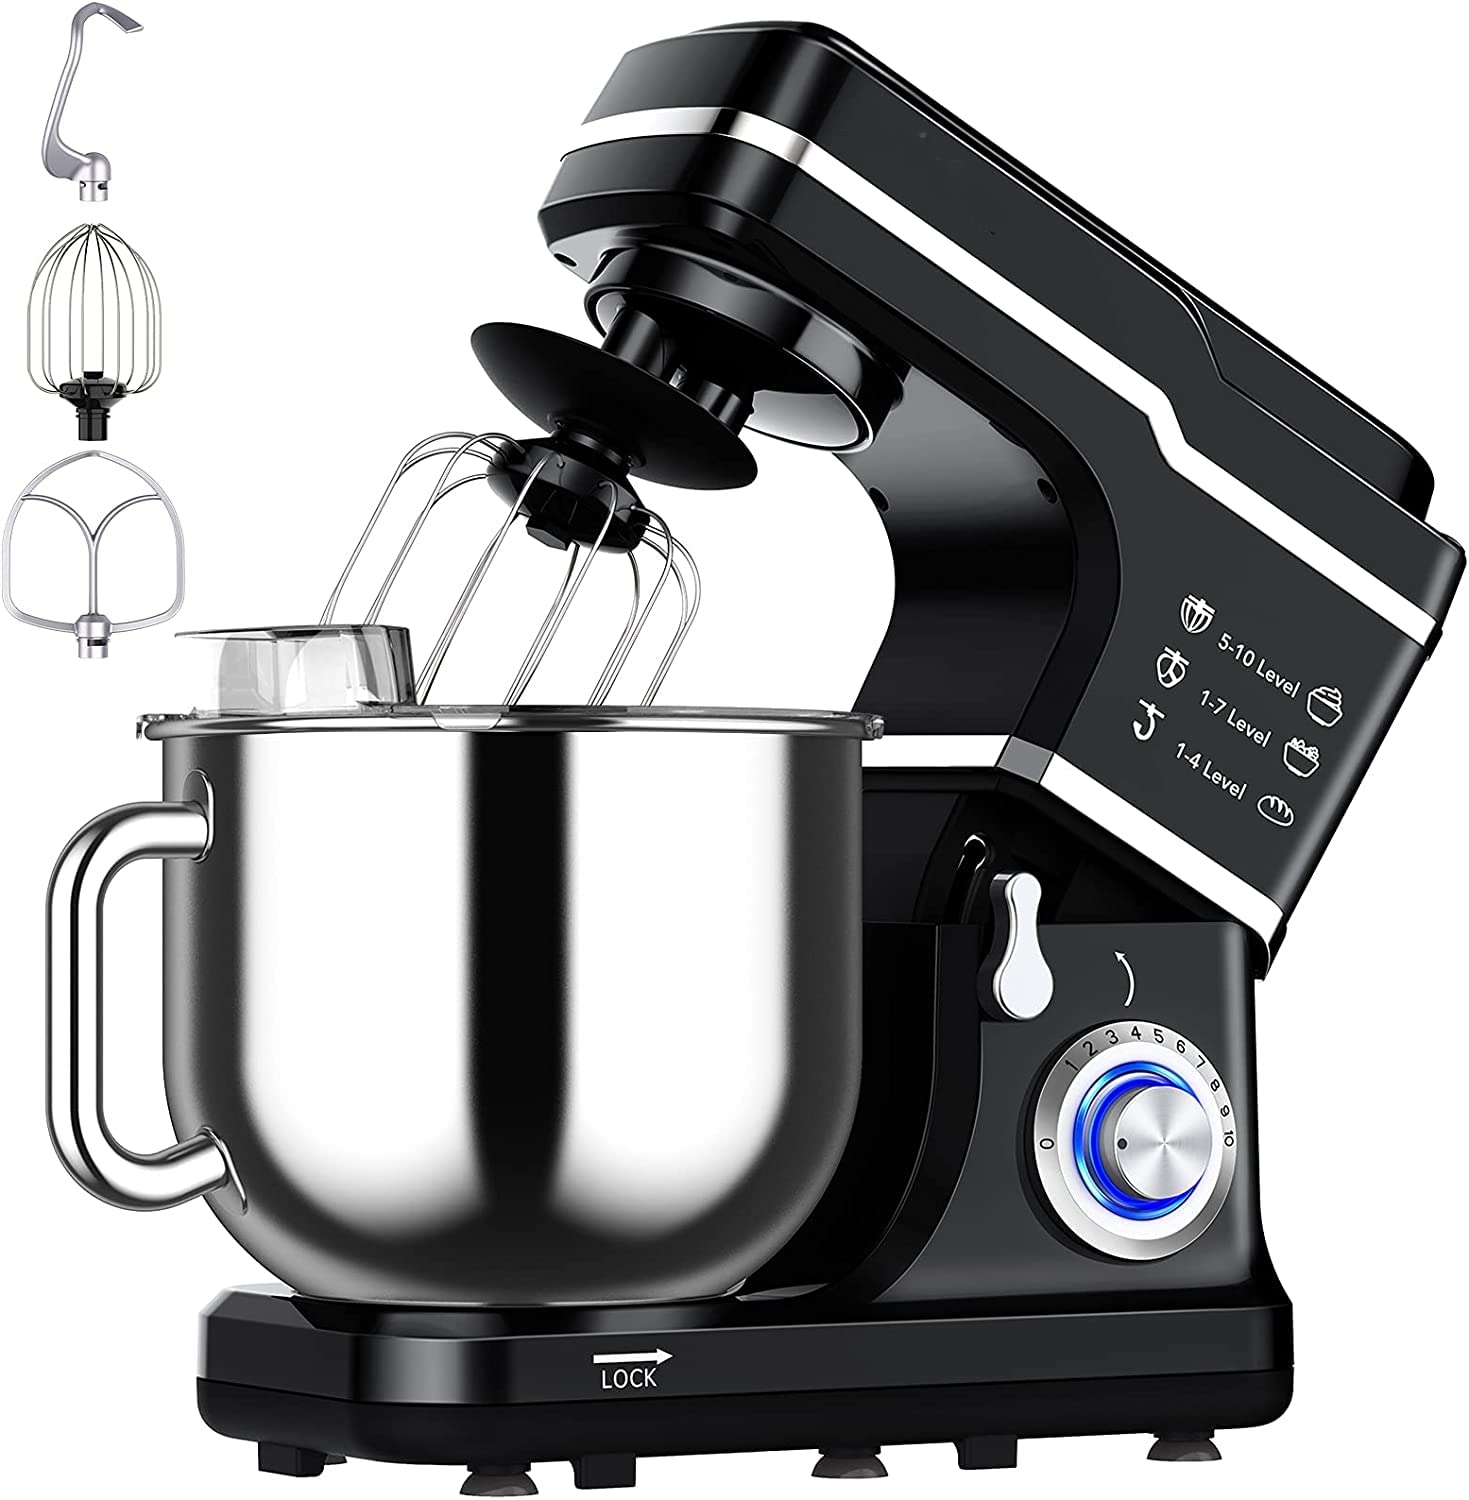 Stand Mixer, FlexWill 7.5QT Electric Food Mixer 10-Speed Tilt-Head Dough Mixer for Baking&Cake, with Stainless Steel Bowl,